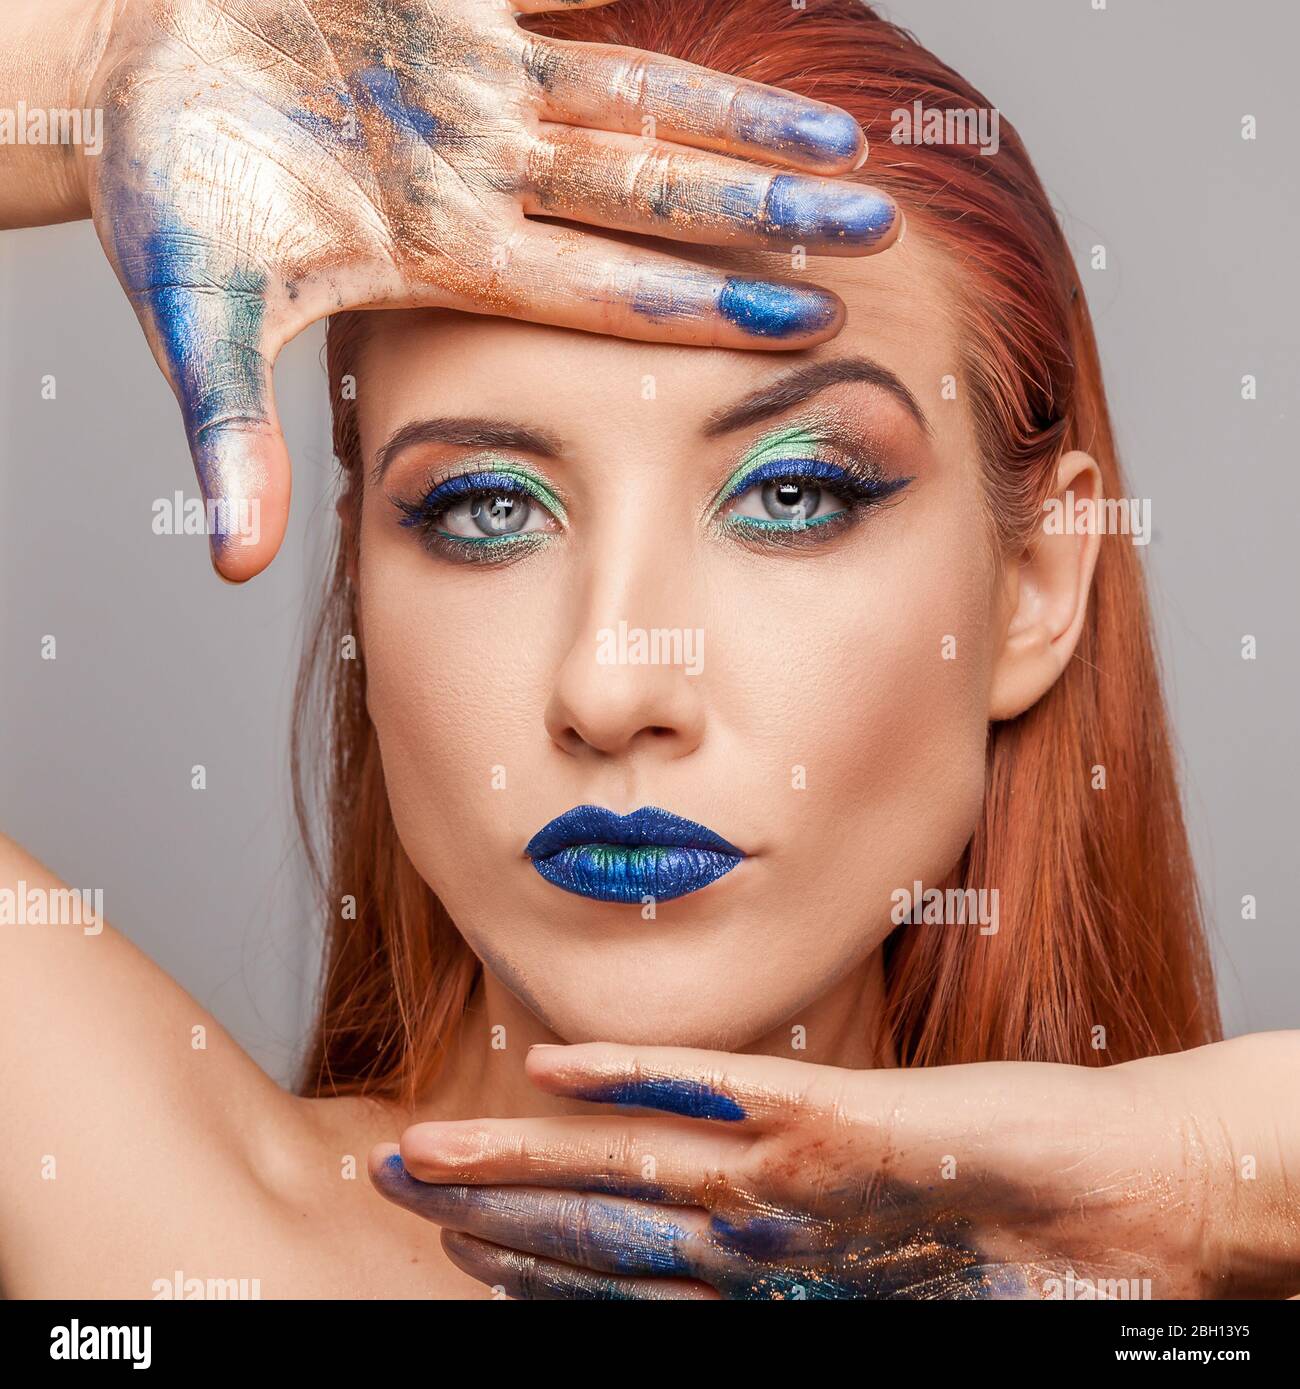 Beautiful fashionable ginger woman. Portrait of a fashion model with bright blue eye makeup. Stock Photo